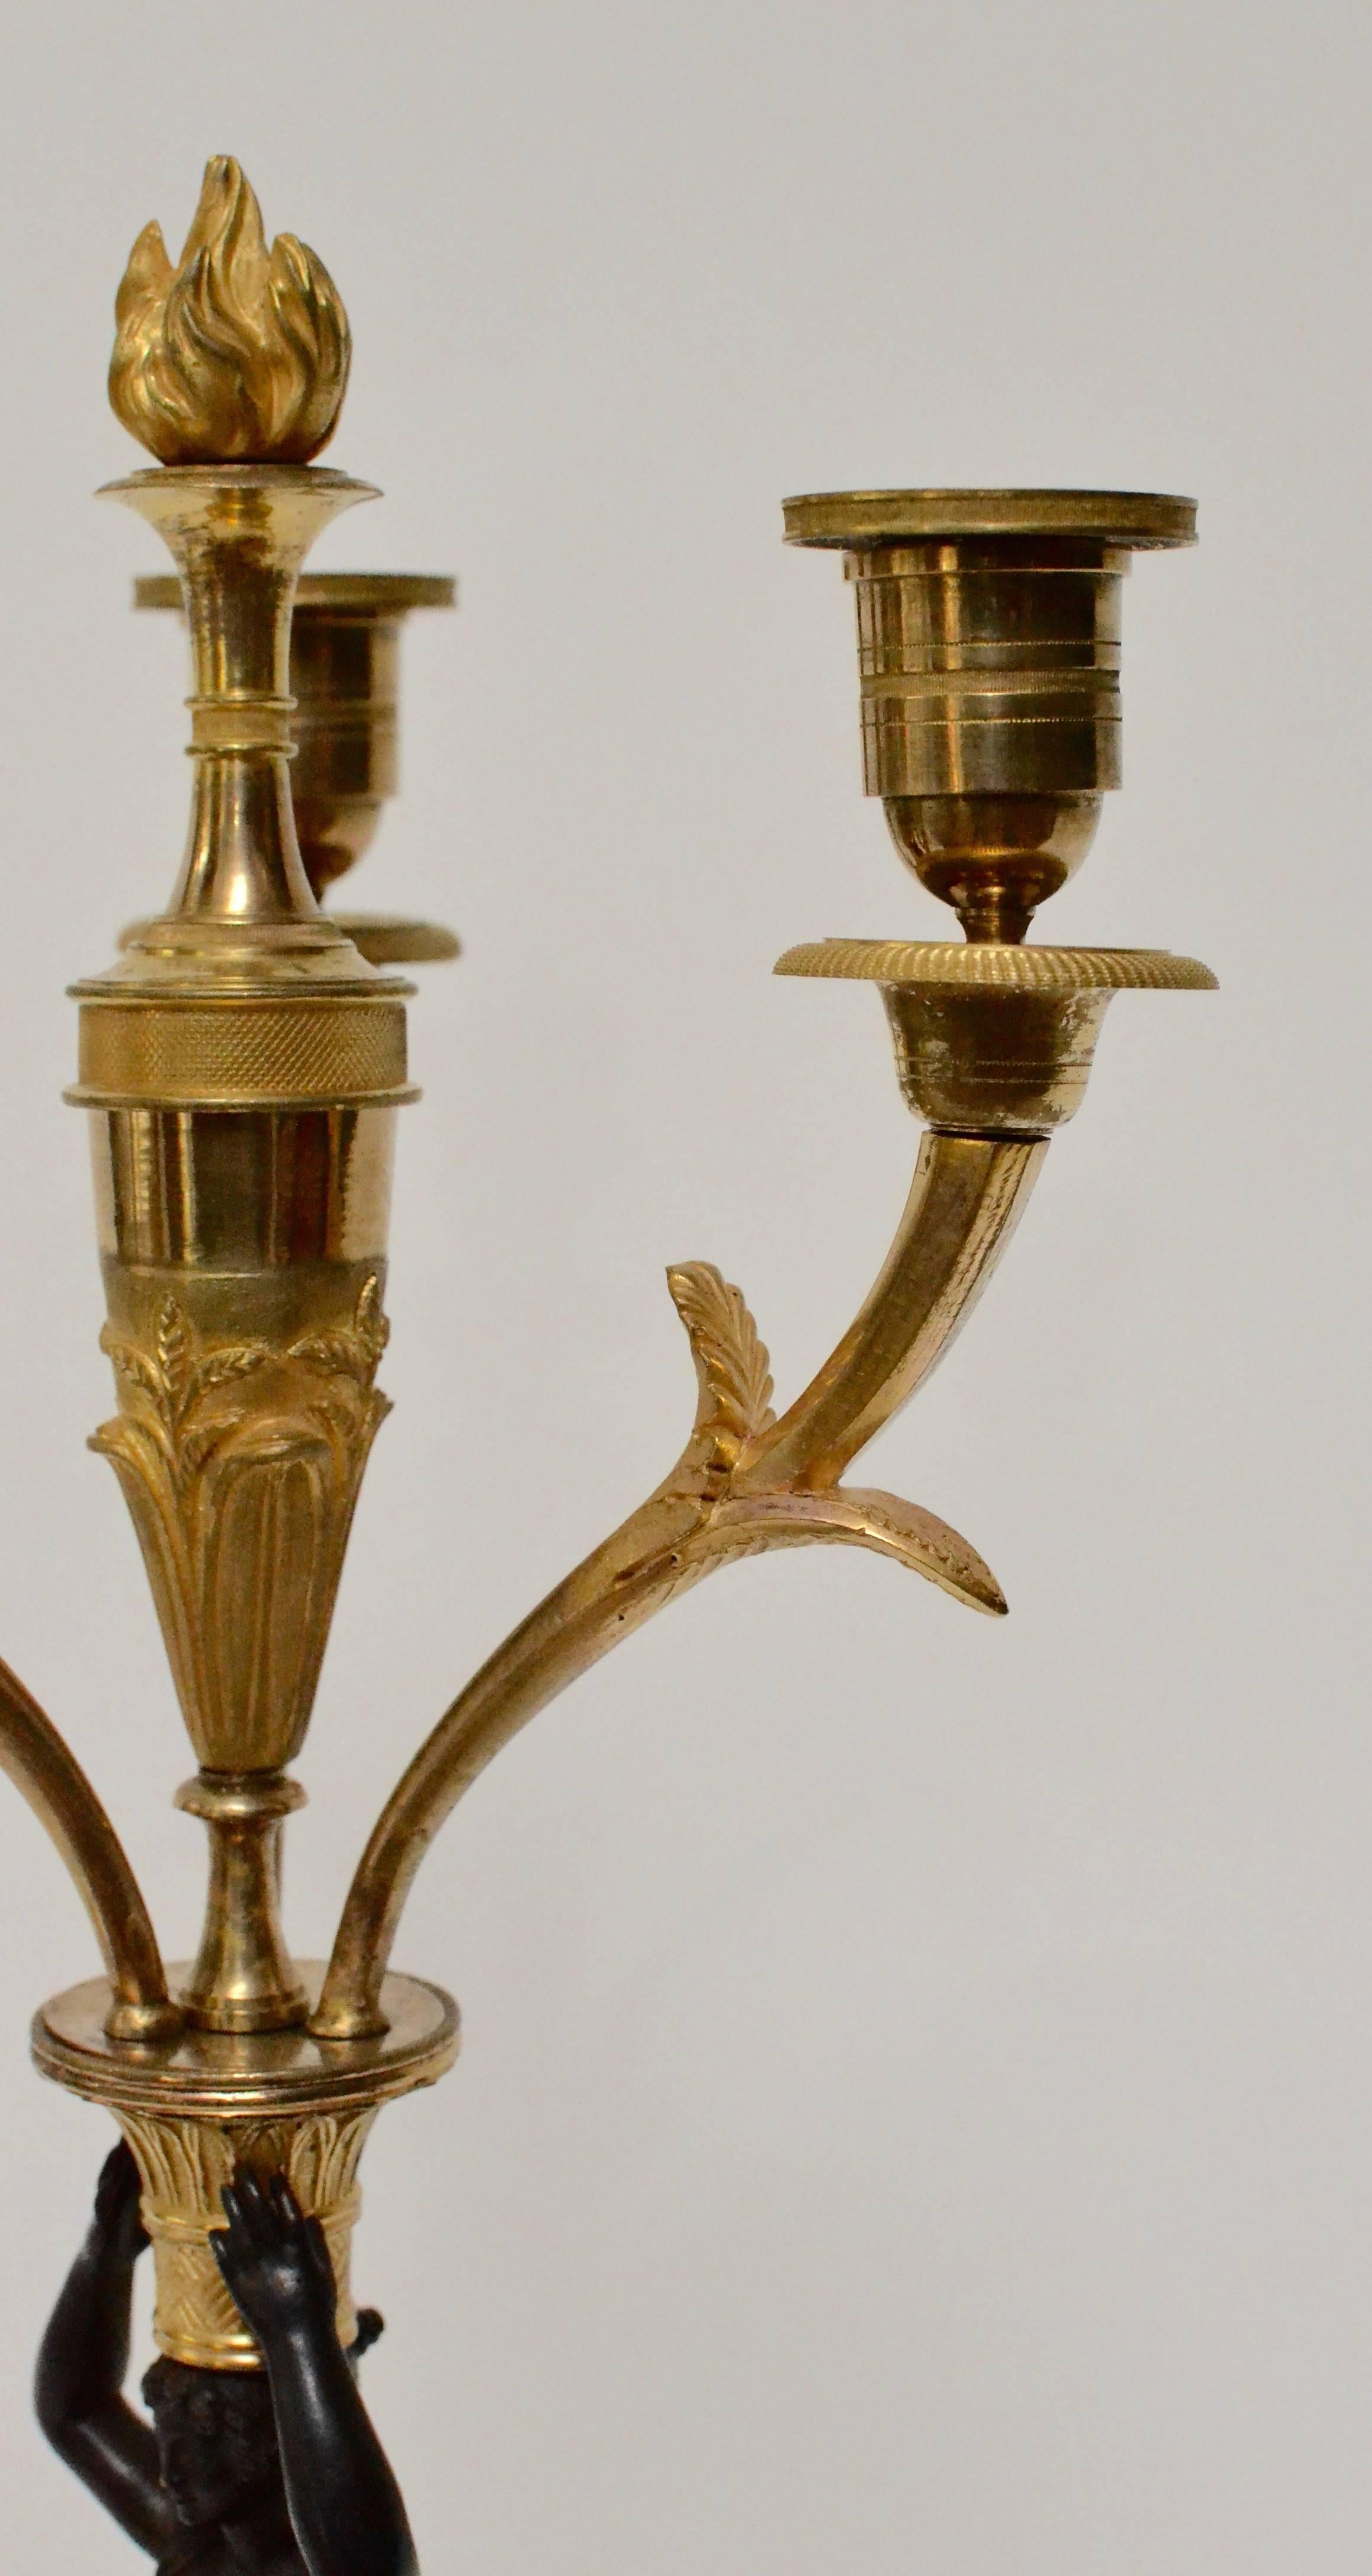 European Pair of Empire Gilt Bronze and Patinated Candelabra, Possibly Germany